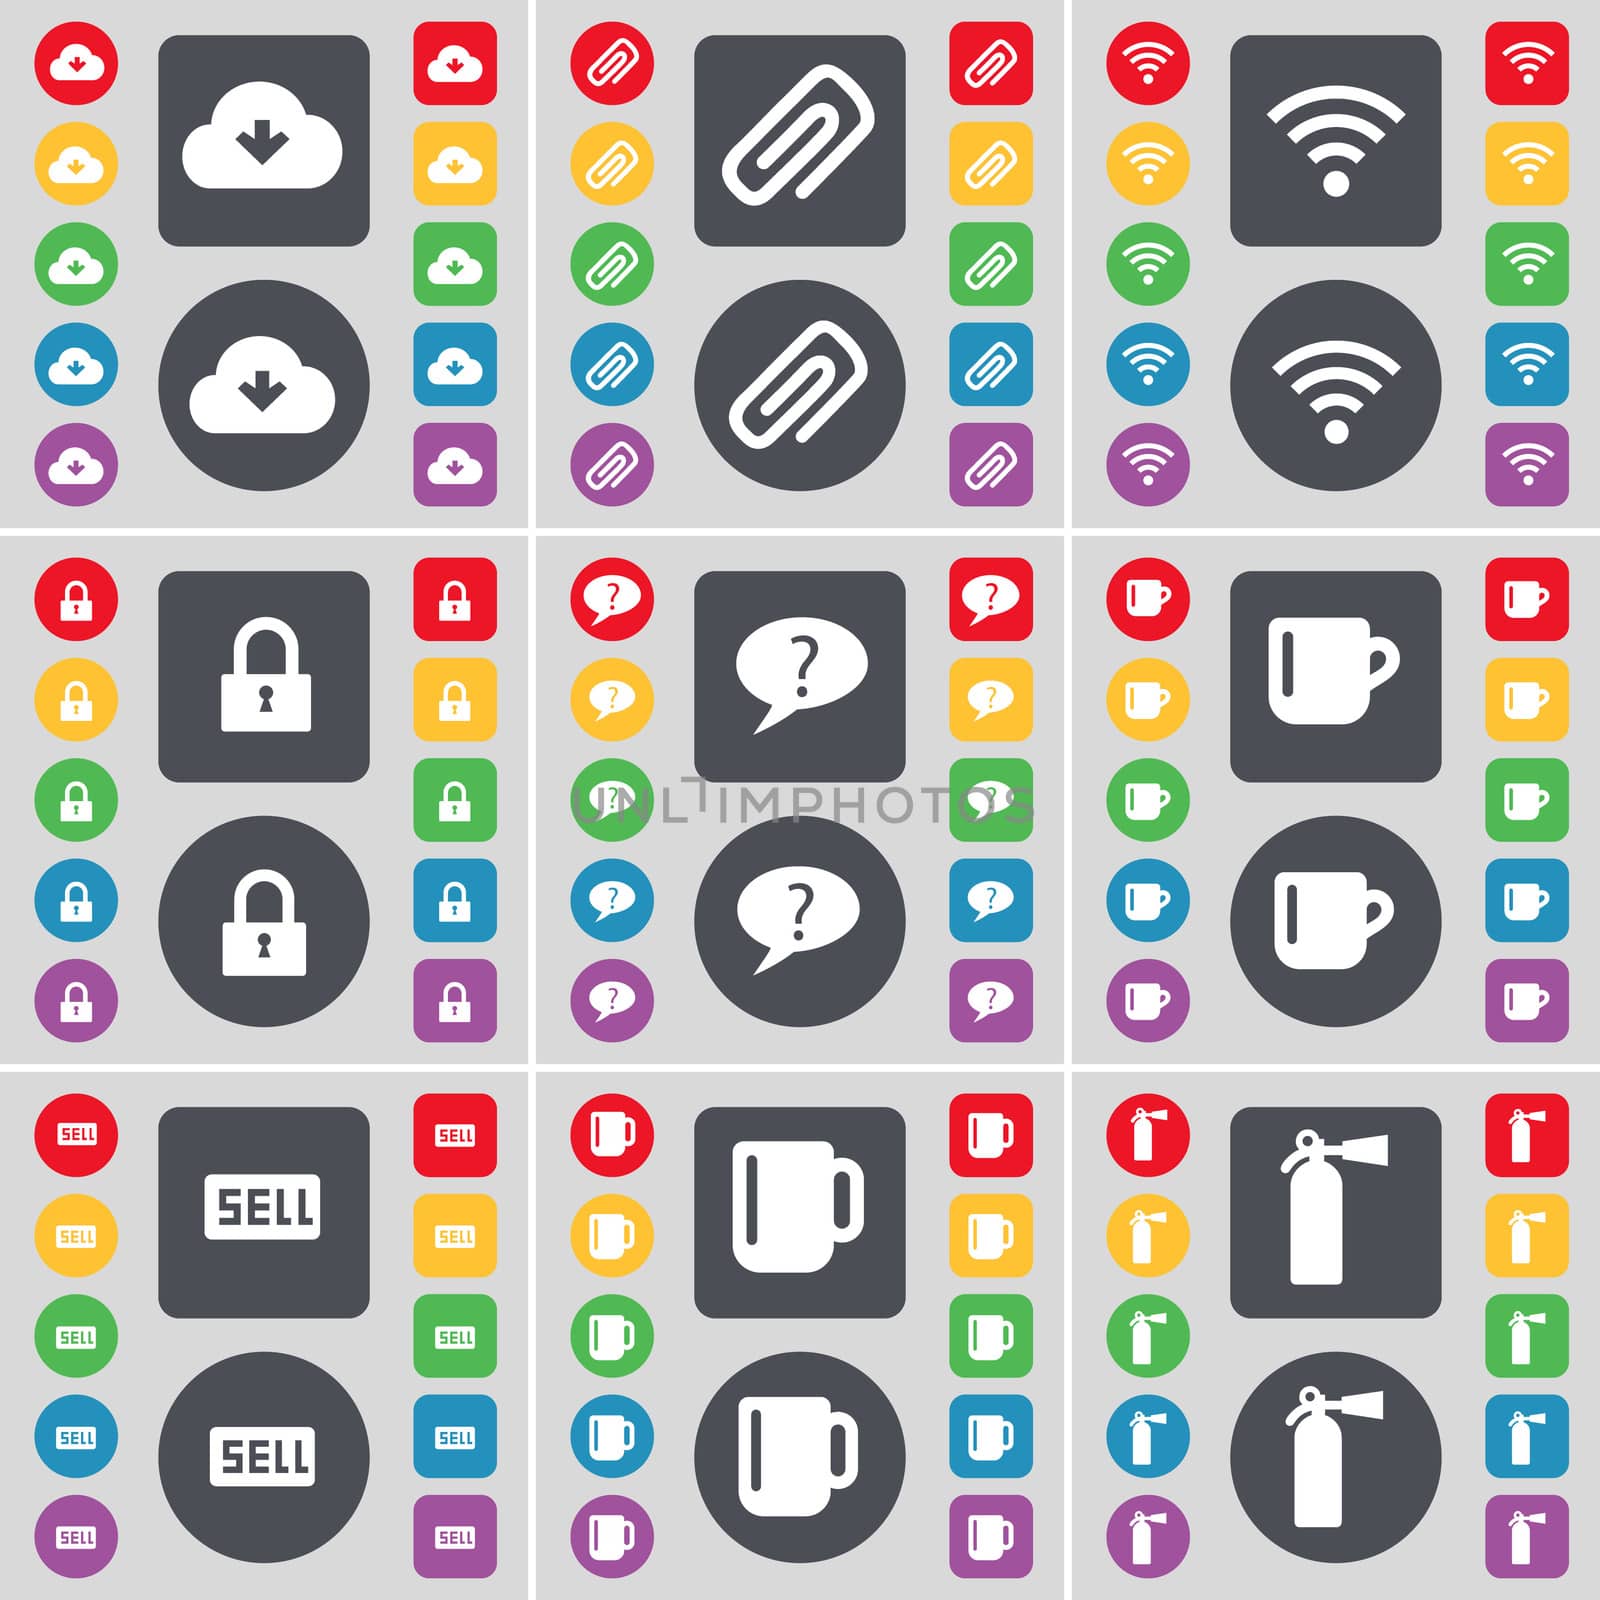 Cloud, Clip, Wi-Fi, Lock, Chat bubble, Cup, Sell, Cup, Fire extinguisher icon symbol. A large set of flat, colored buttons for your design.  by serhii_lohvyniuk